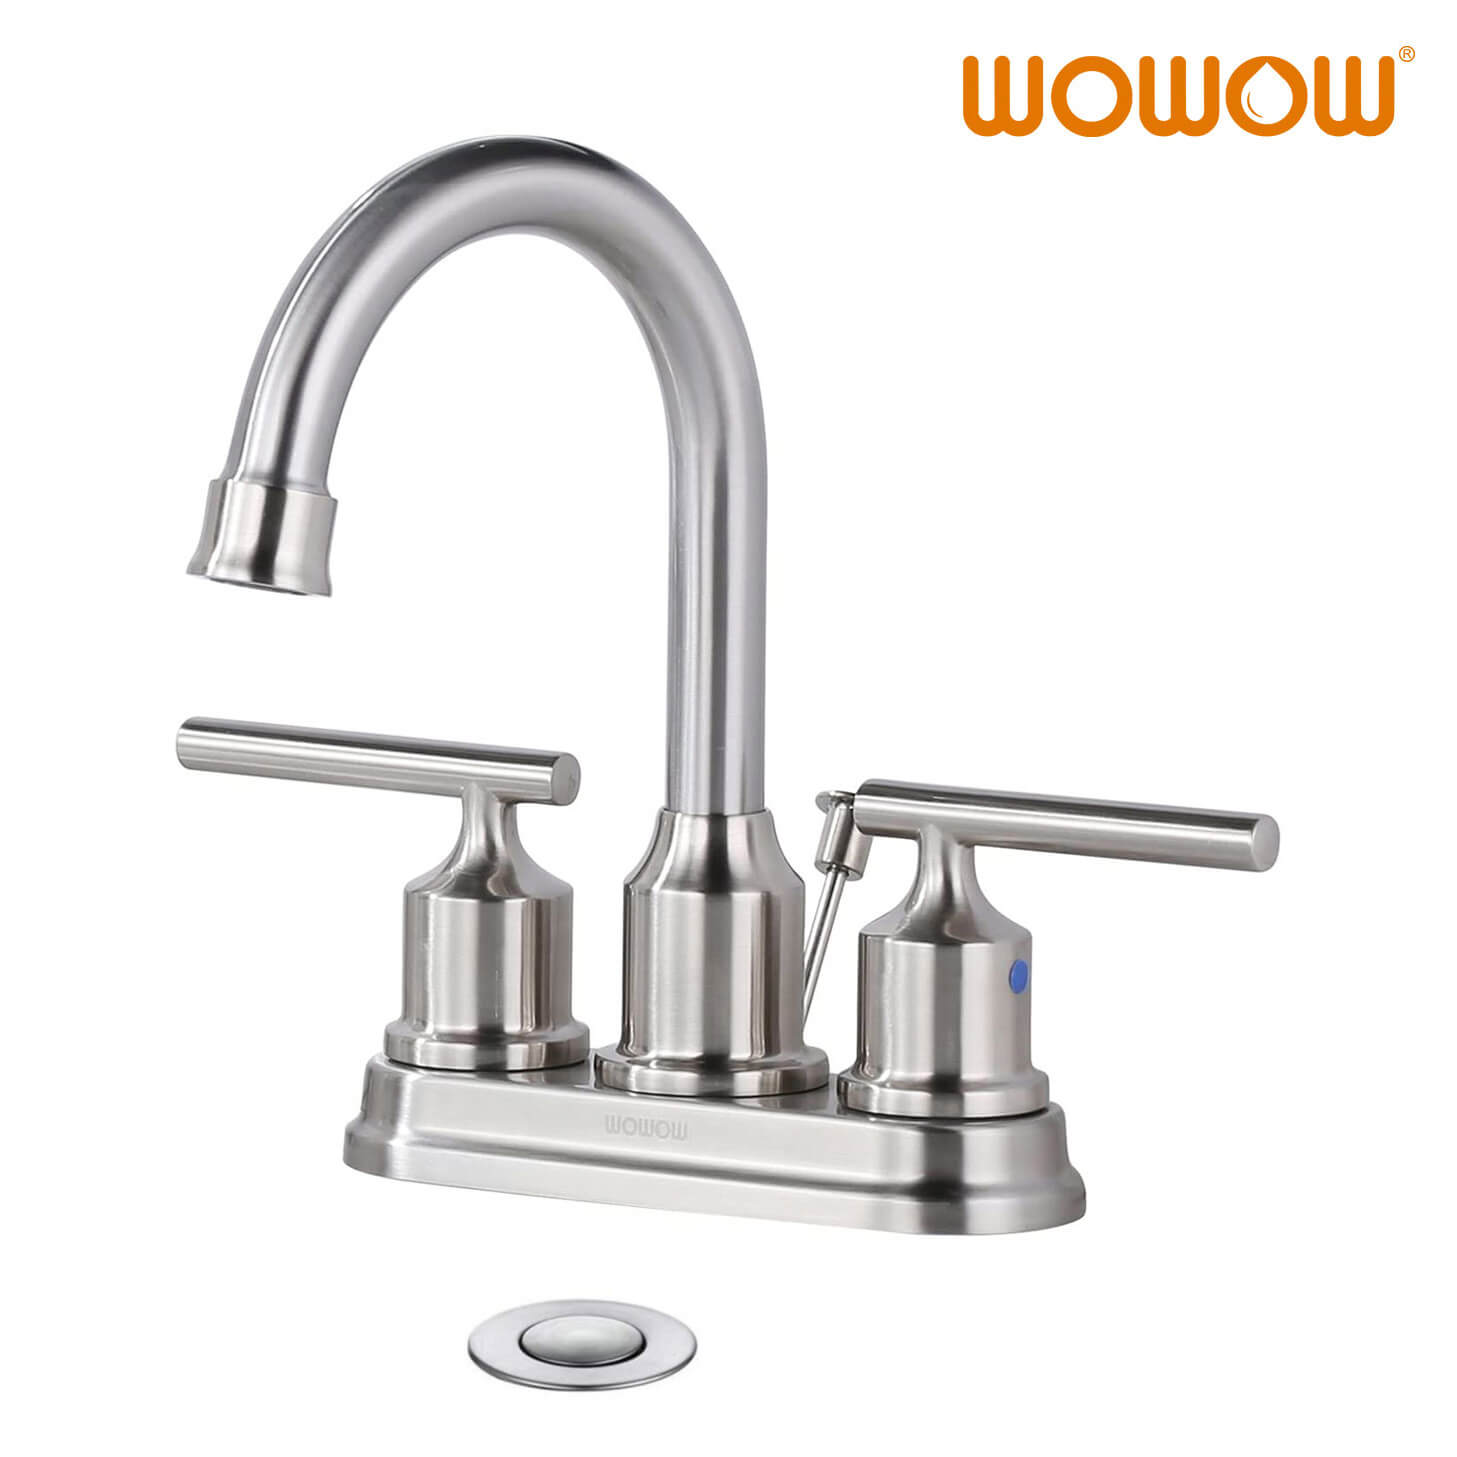 wowow-4-inch-centerset-bathroom-faucet-3-hole-brushed-nickel-bathroom-sink-faucet